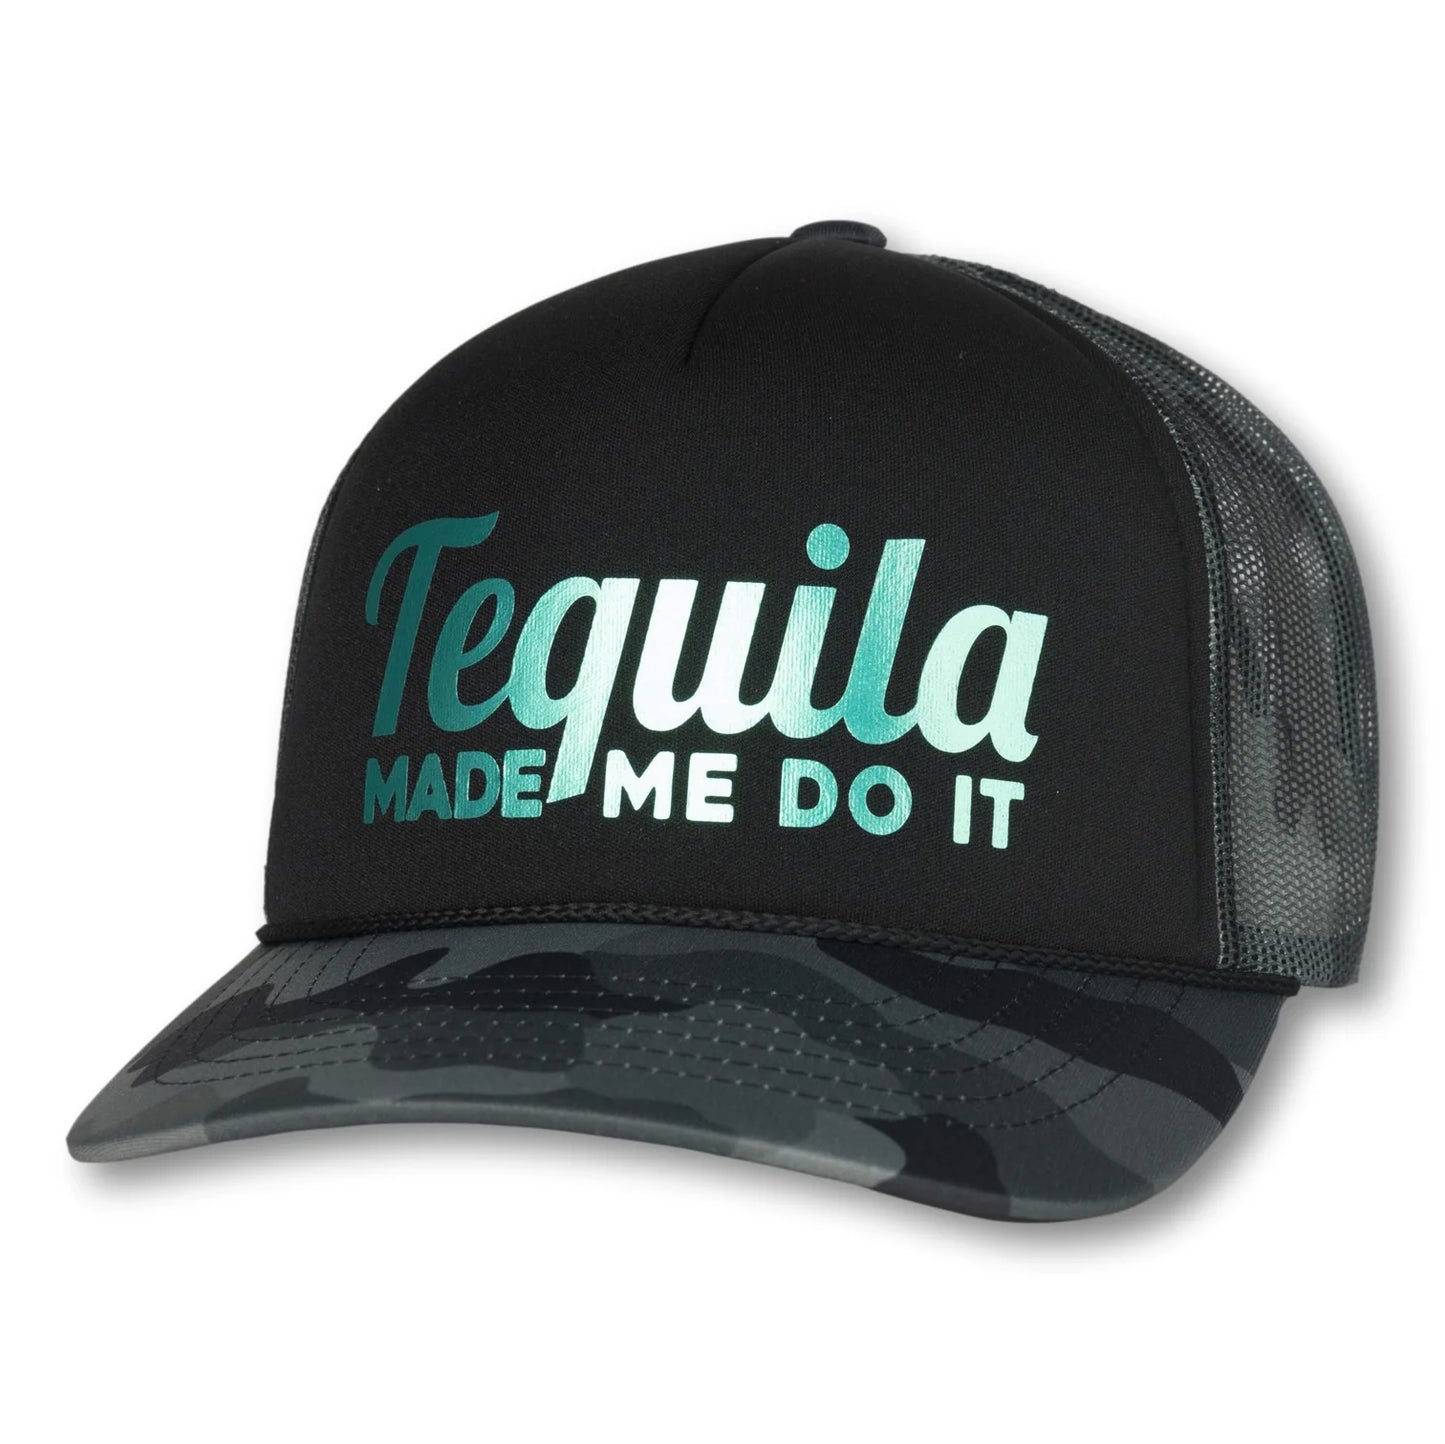 Tequila Made Me Do It Trucker Hat